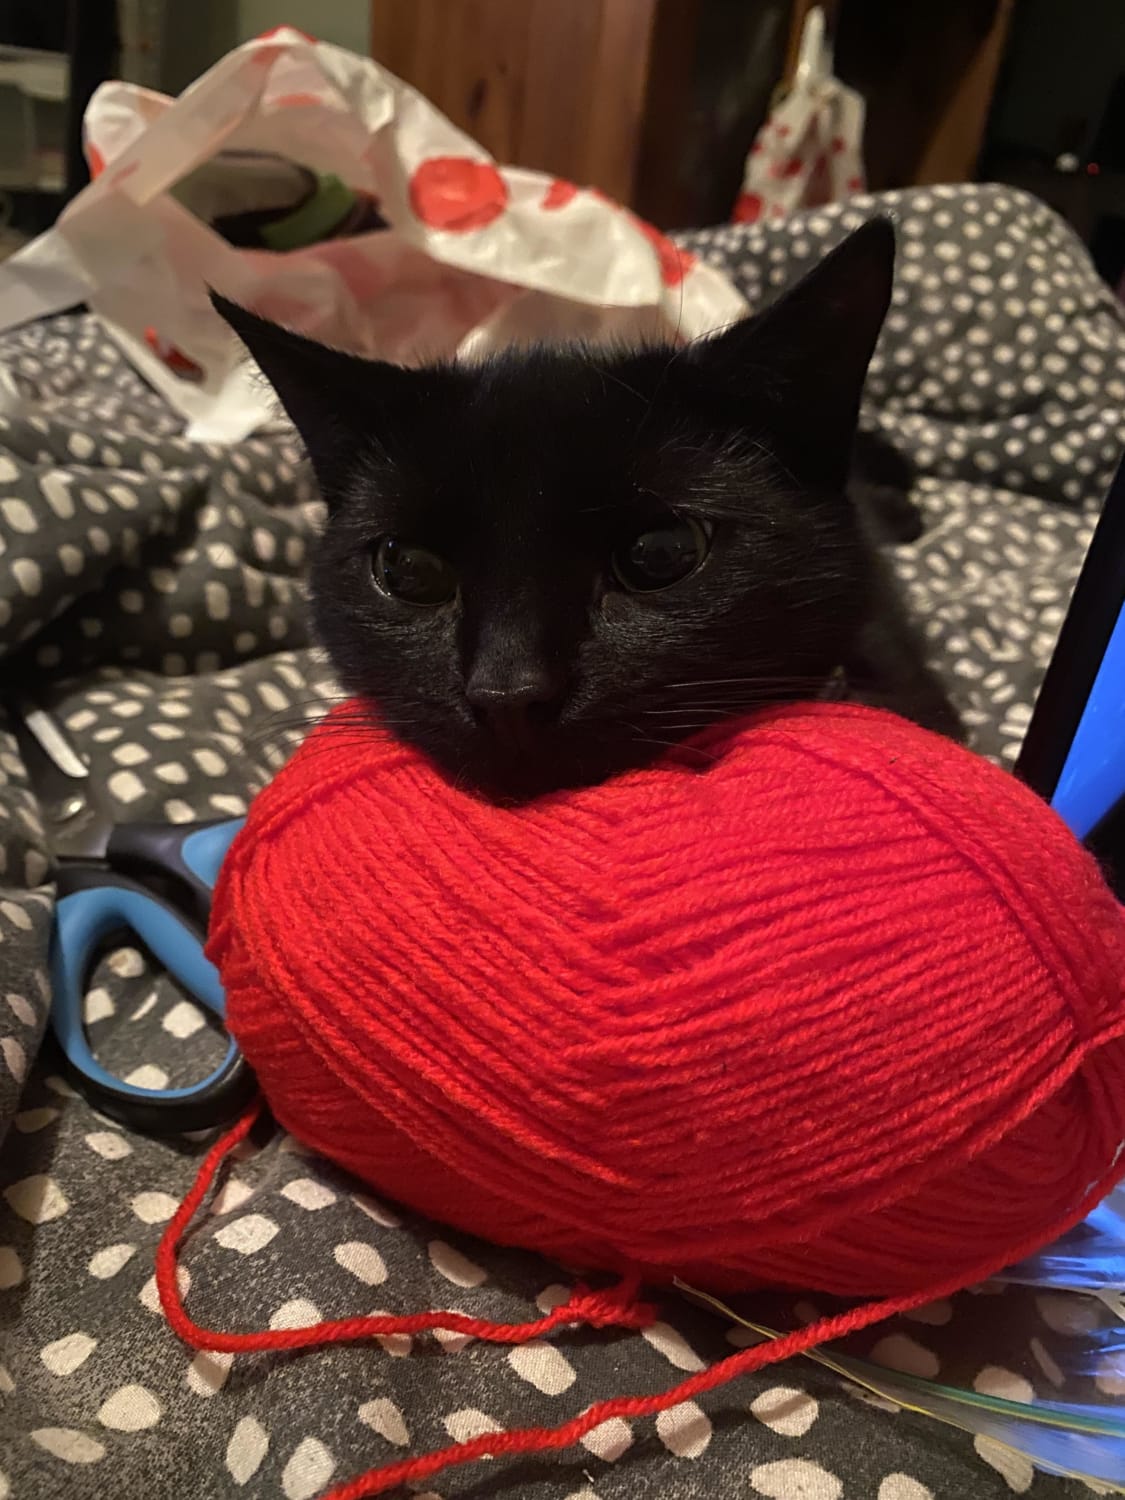 I was crocheting, he was being cute 🥰